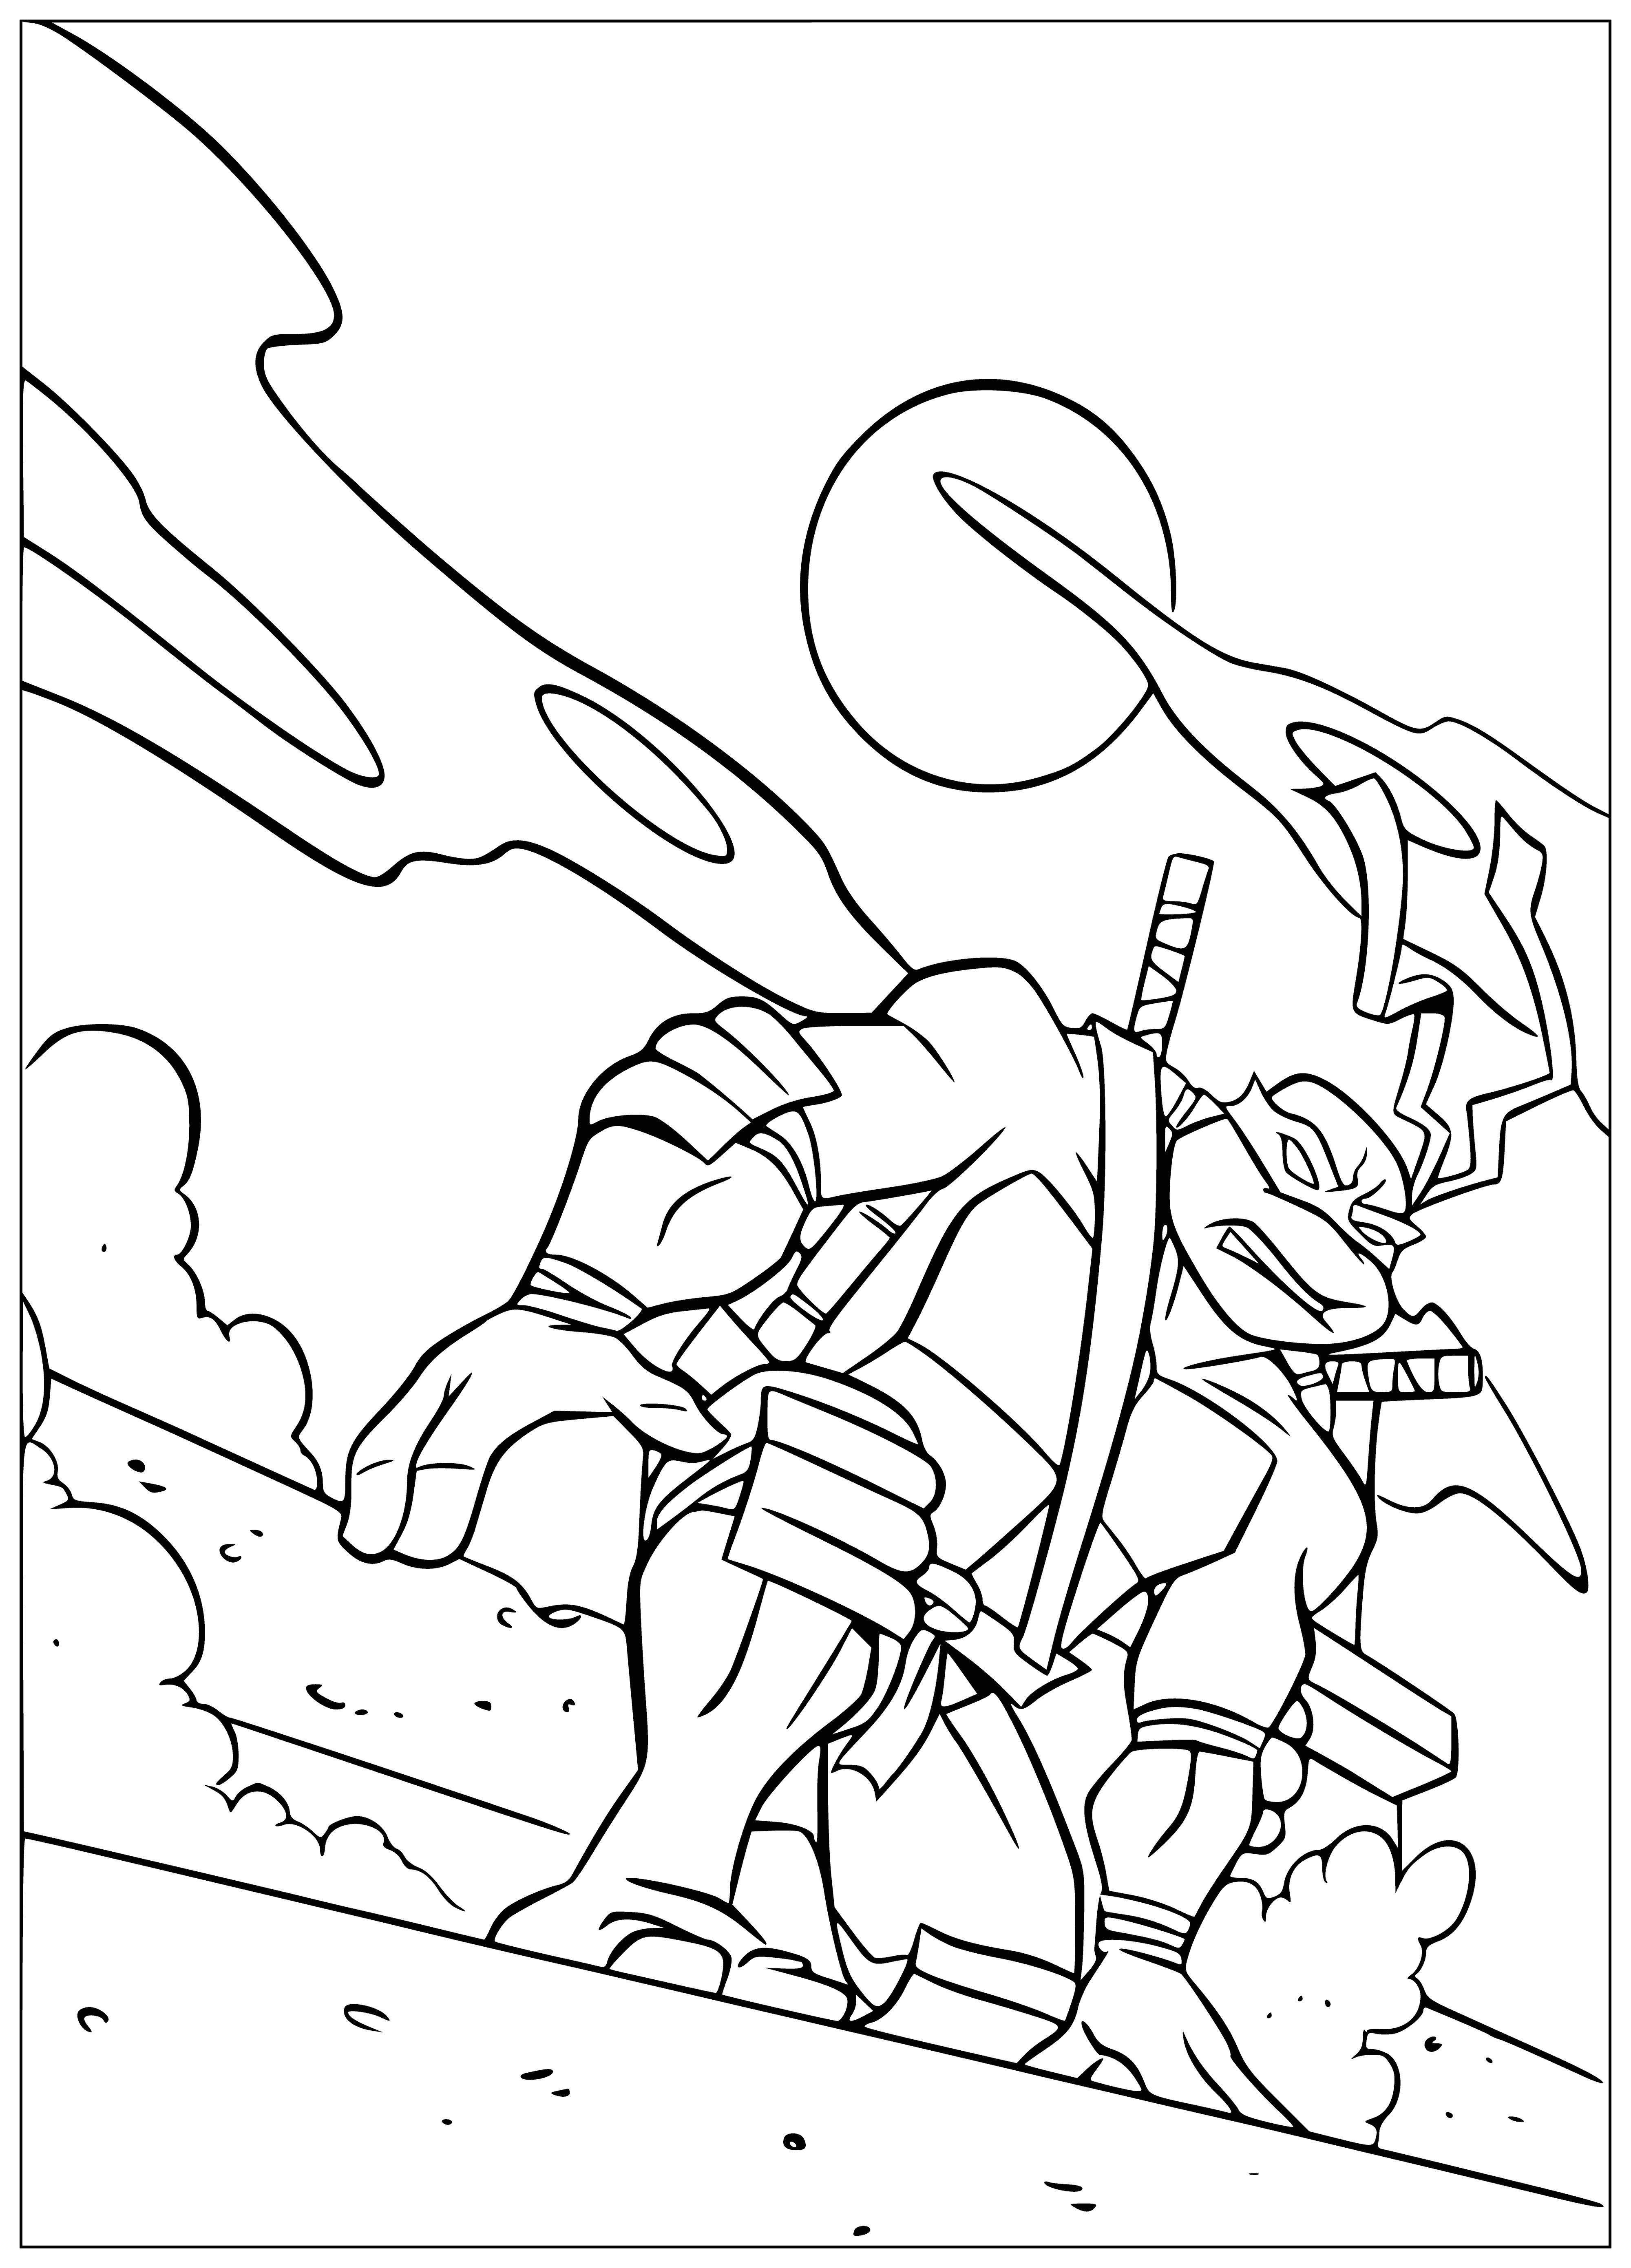 Leonardo on the roof coloring page